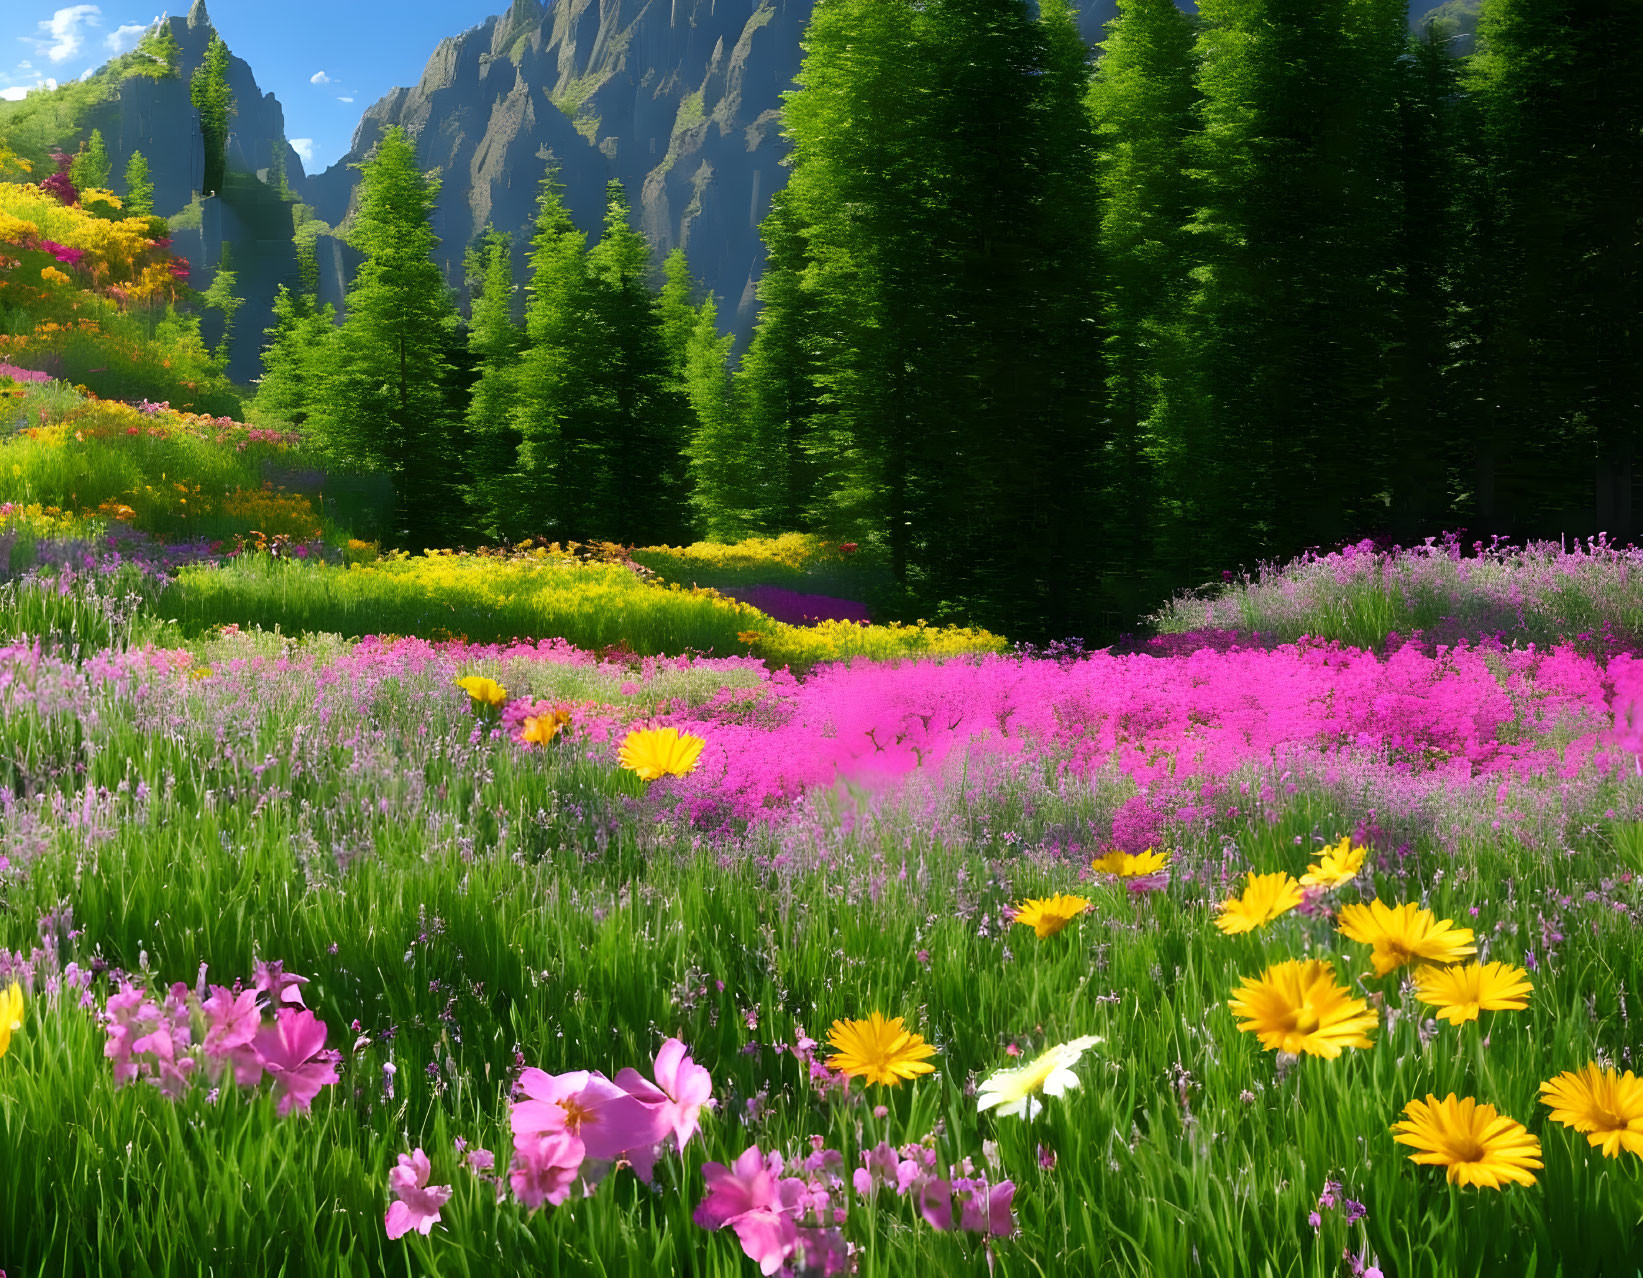 Colorful Wildflower Meadow with Pine Trees and Cliffs